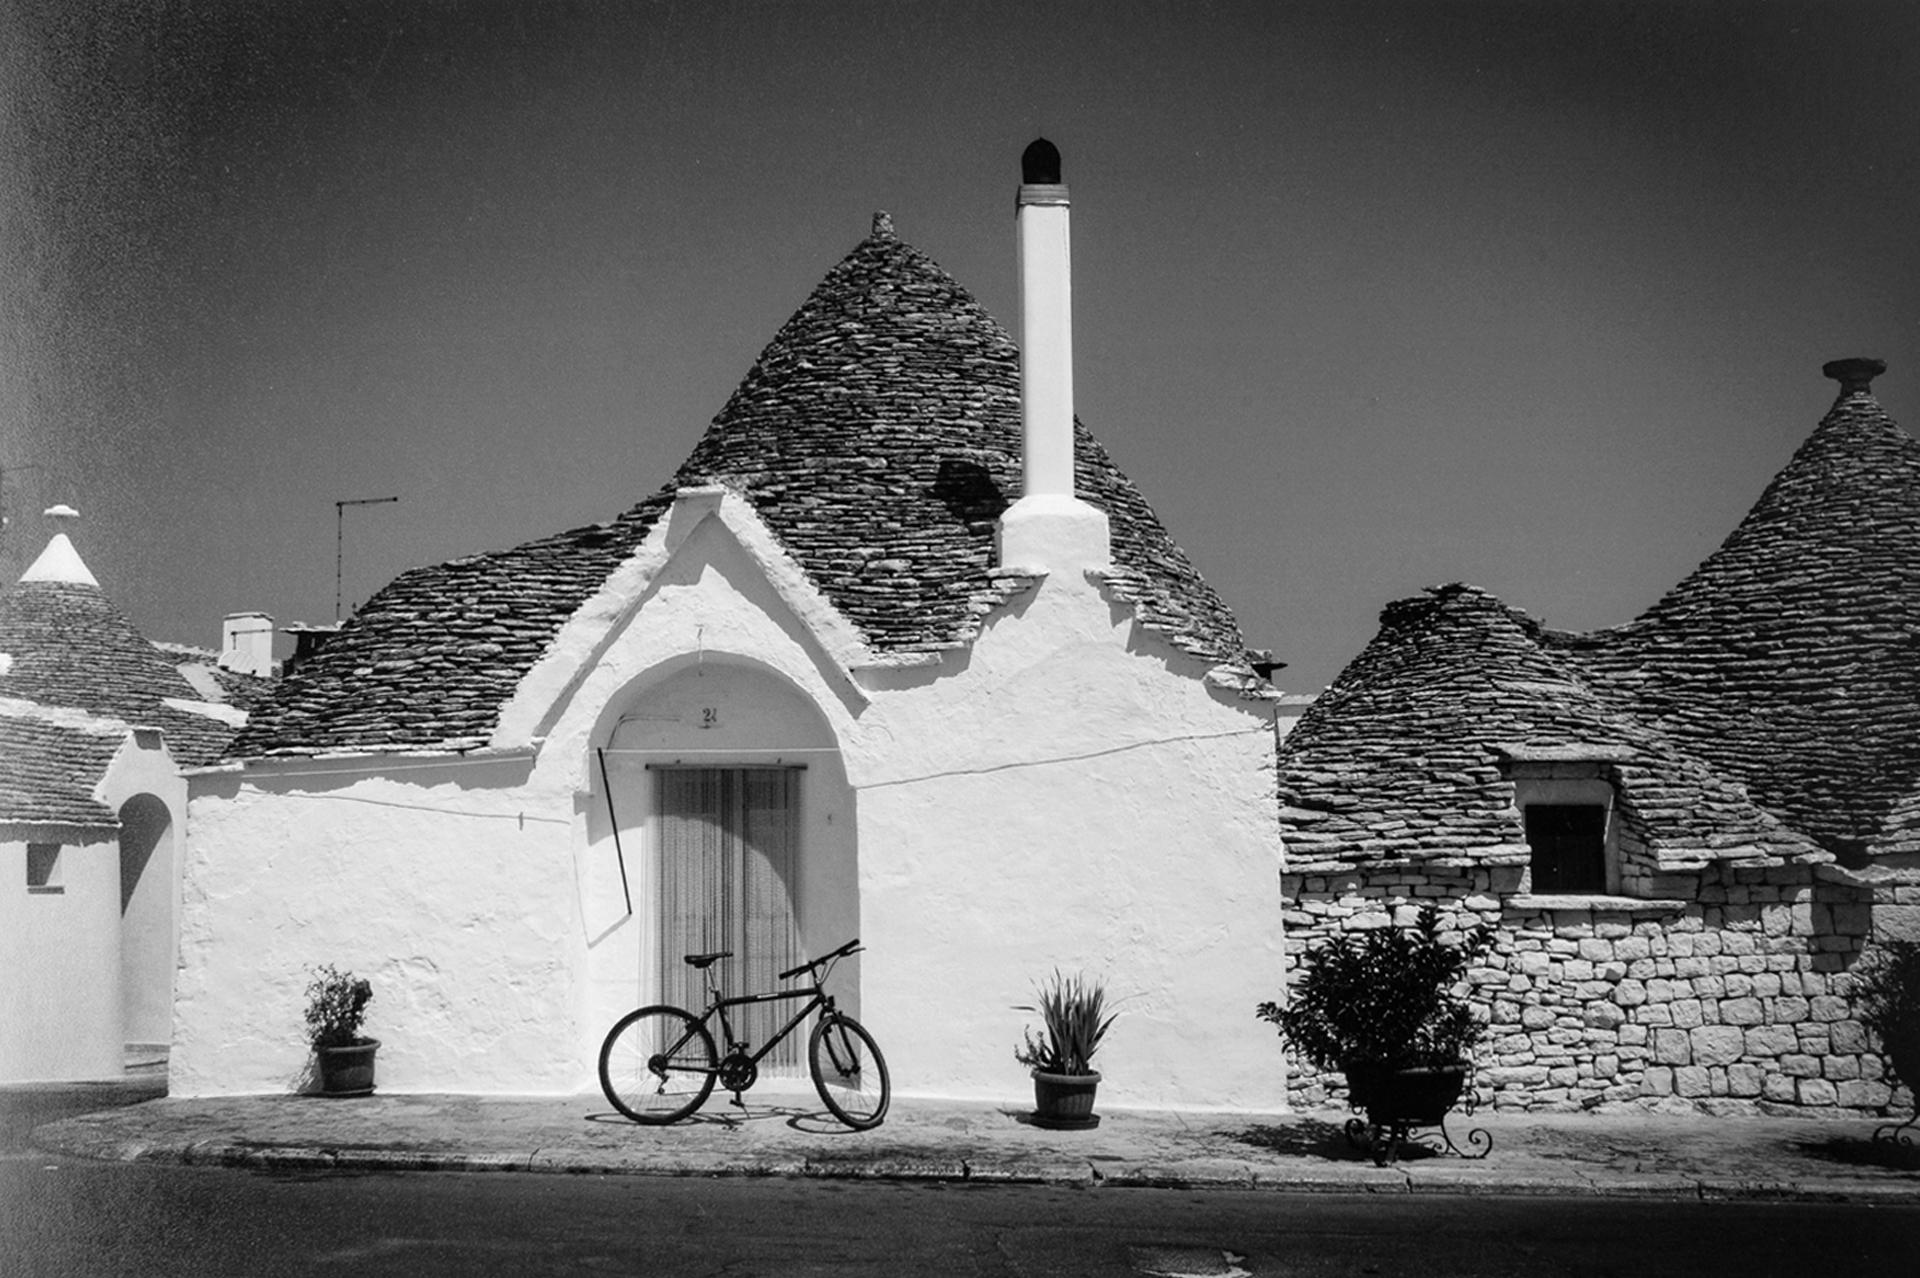 SN/4 - size without frame cm. 20 x 29.
Unique copy on digital file and printed on traditional pearl paper in black and white.
Alberobello is a little town in southern Italy, famous all over the world for the roofs of its houses.